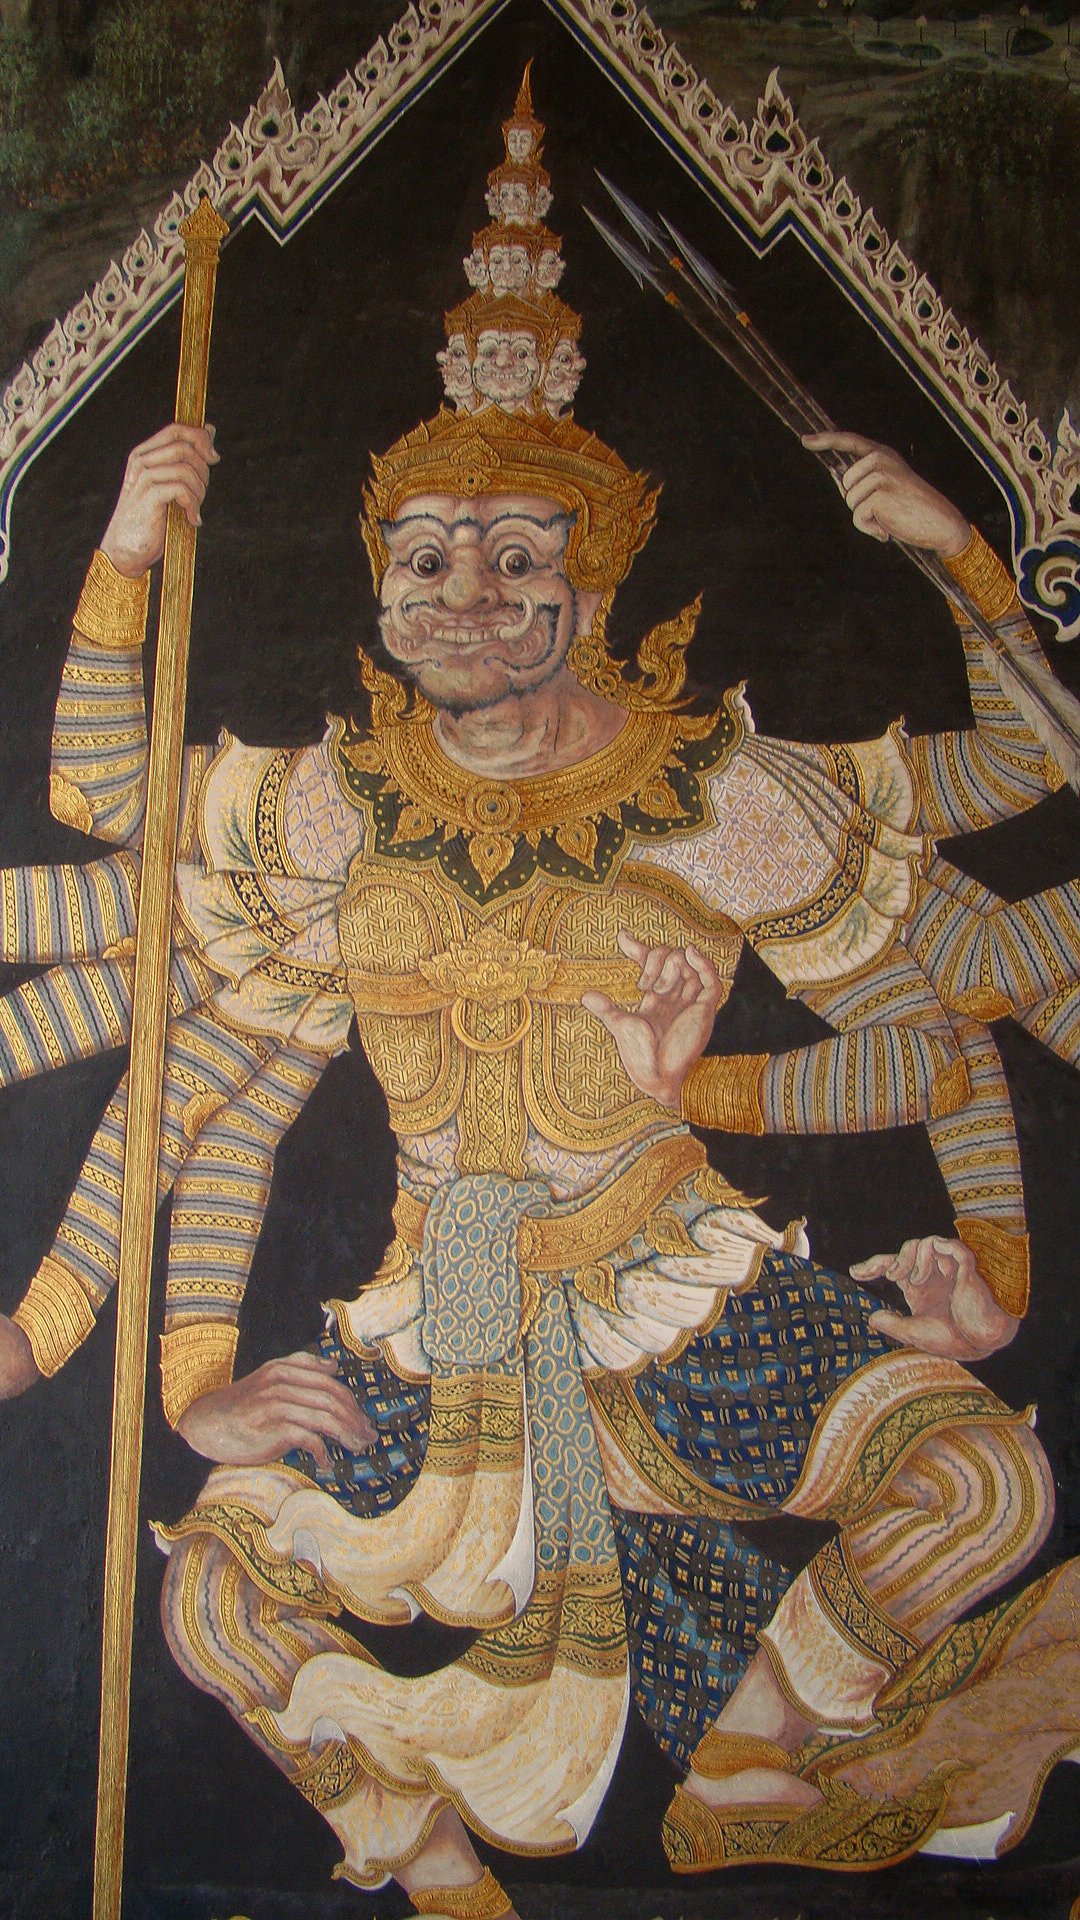 a colorful mural depicting the god with his arms spread in the air